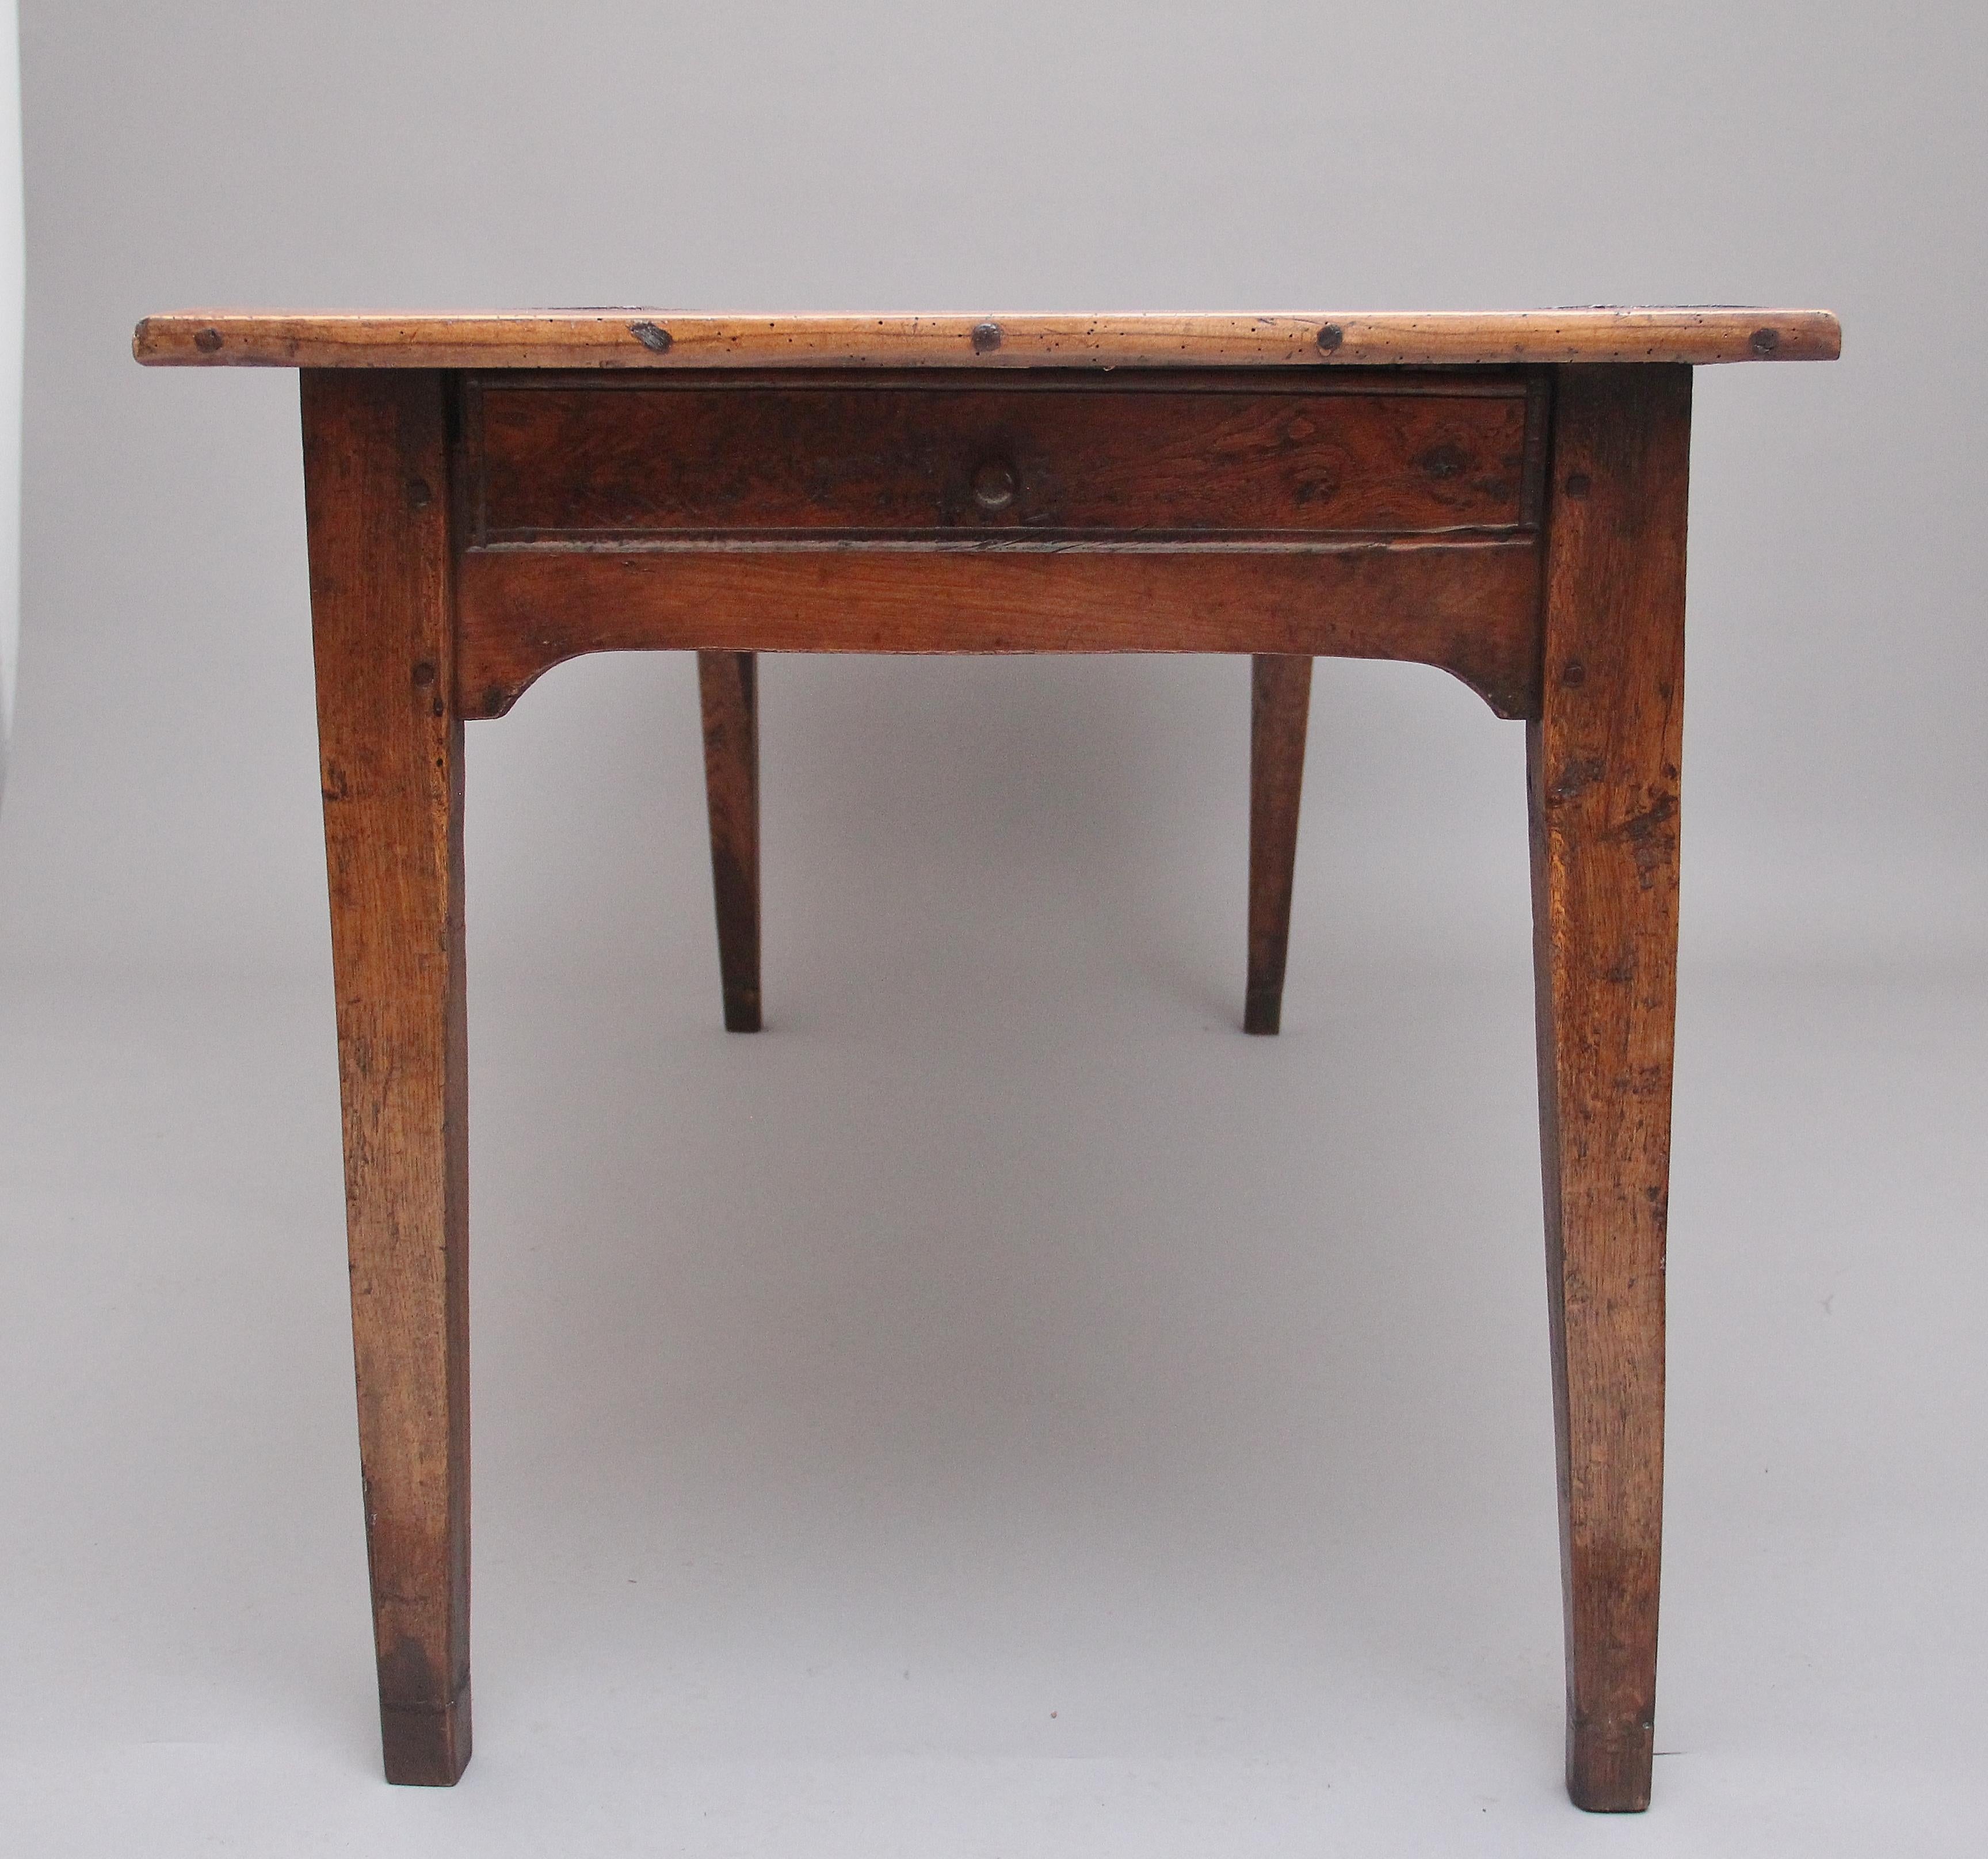 Early 19th Century Rustic Fruitwood Farmhouse Table 1